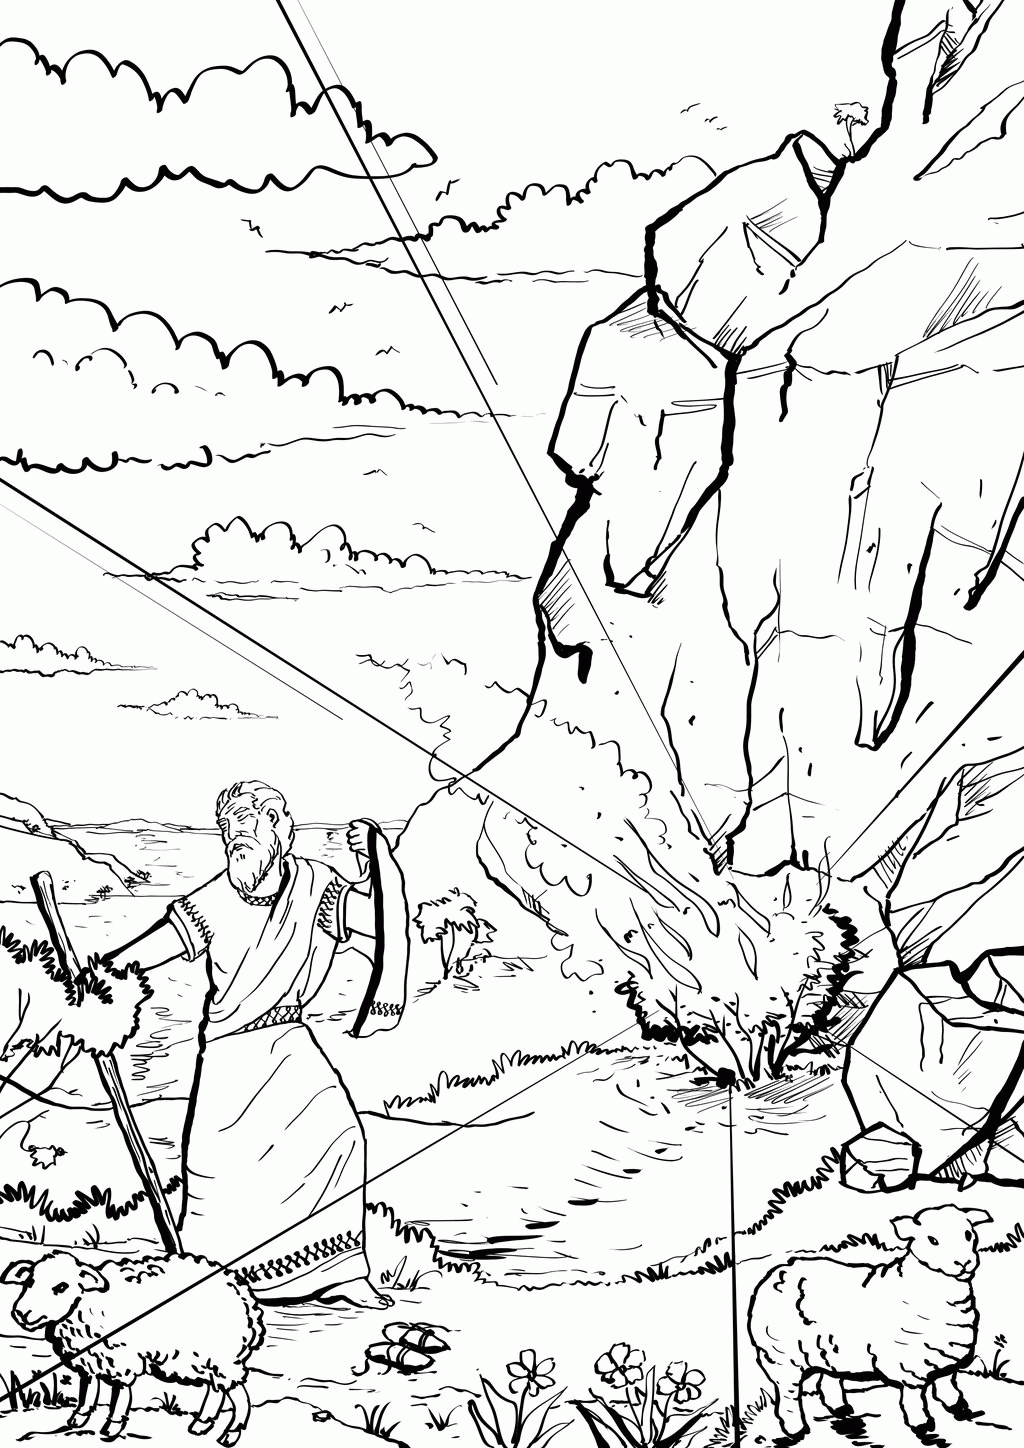 Moses and the burning bush by GhitaB27 on DeviantArt